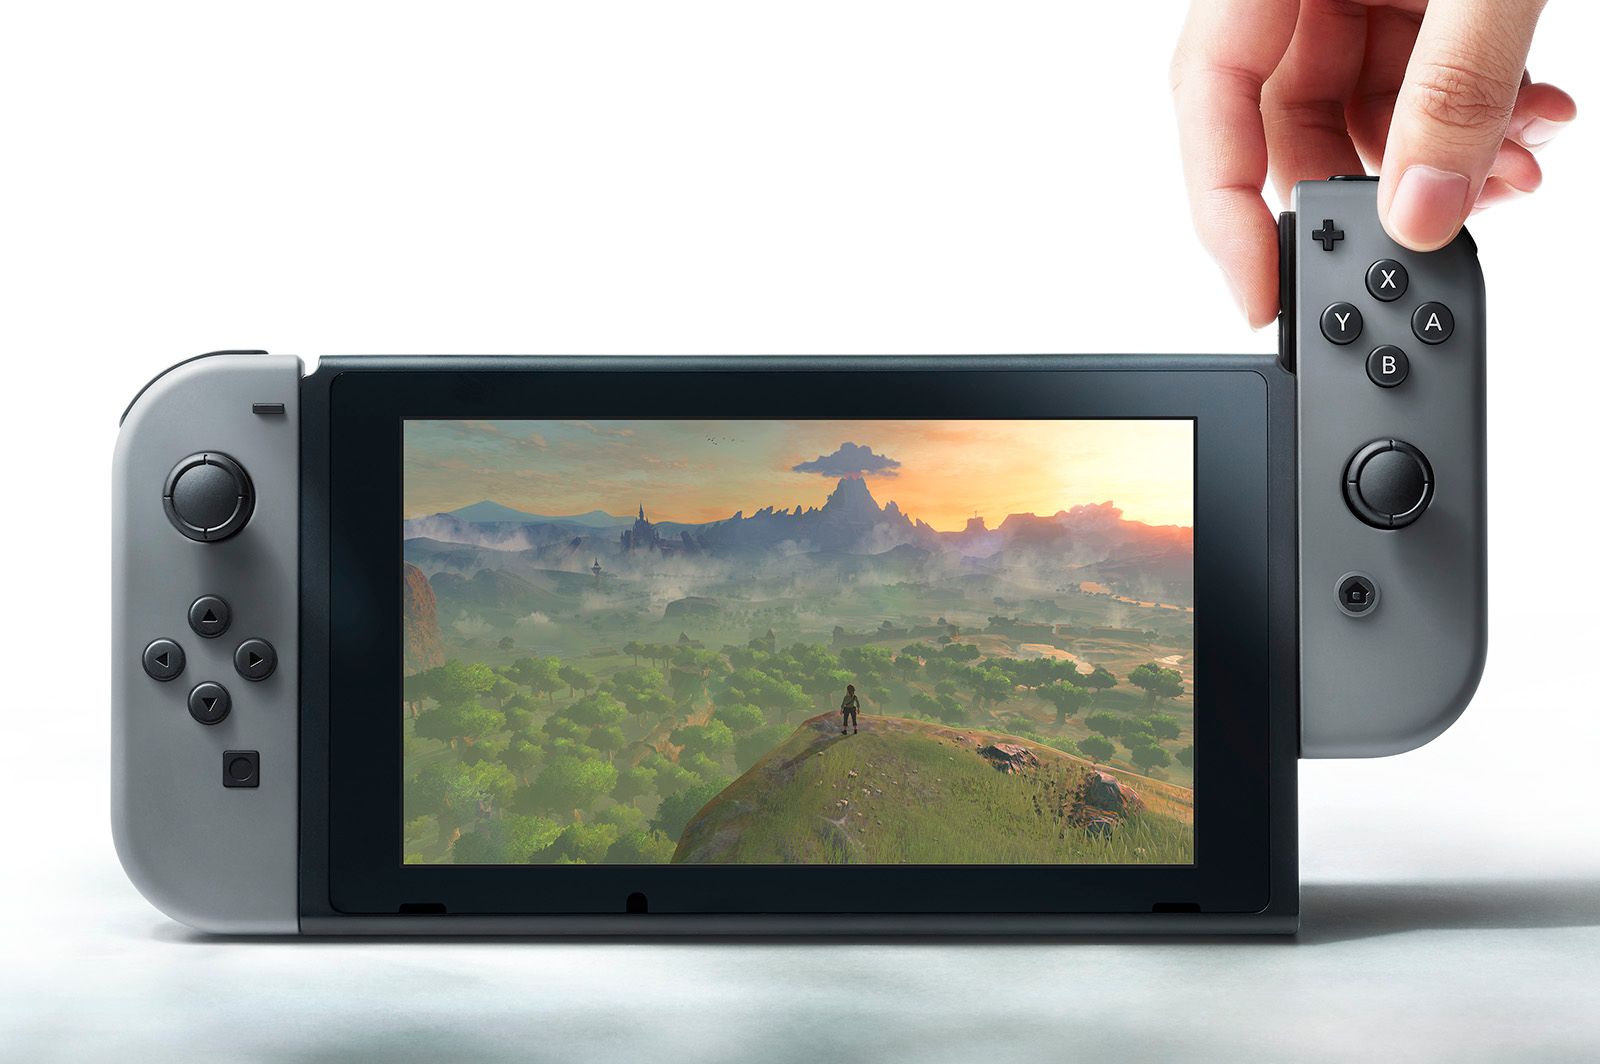 nintendo switch specs and feature reveal set for 13 january image 1